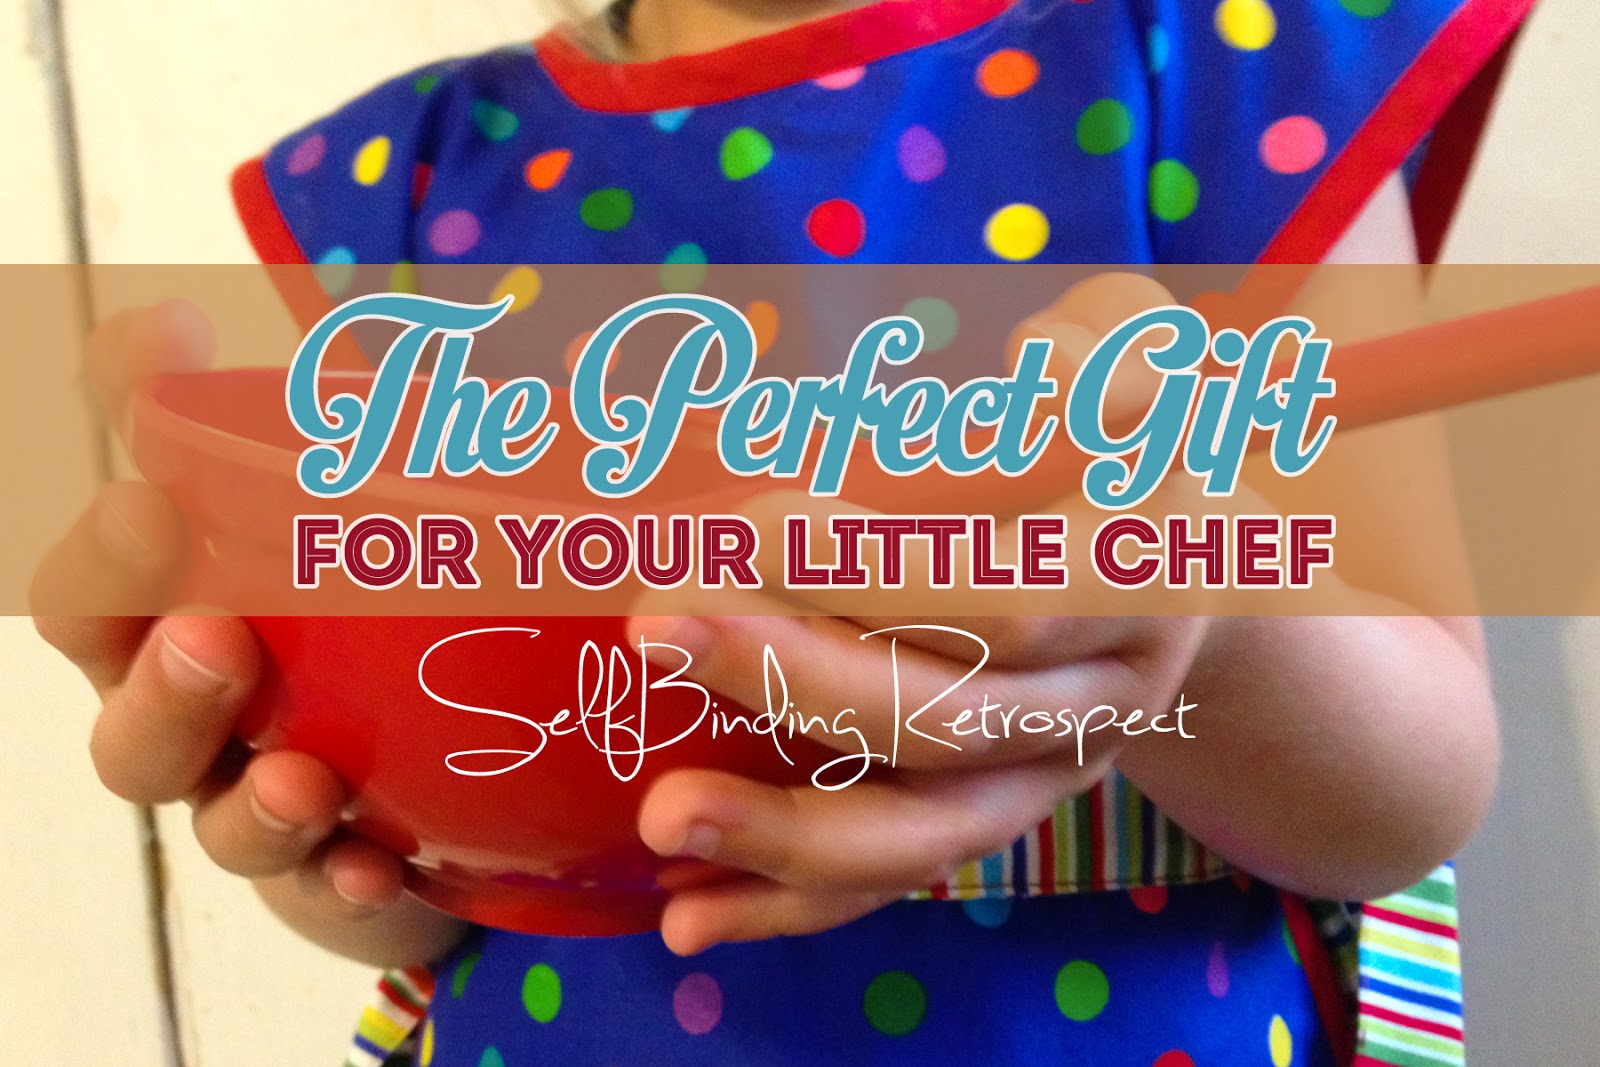 http://selfbindingretrospect.alannarusnak.com/2014/08/the-perfect-gift-for-your-little-chef.html